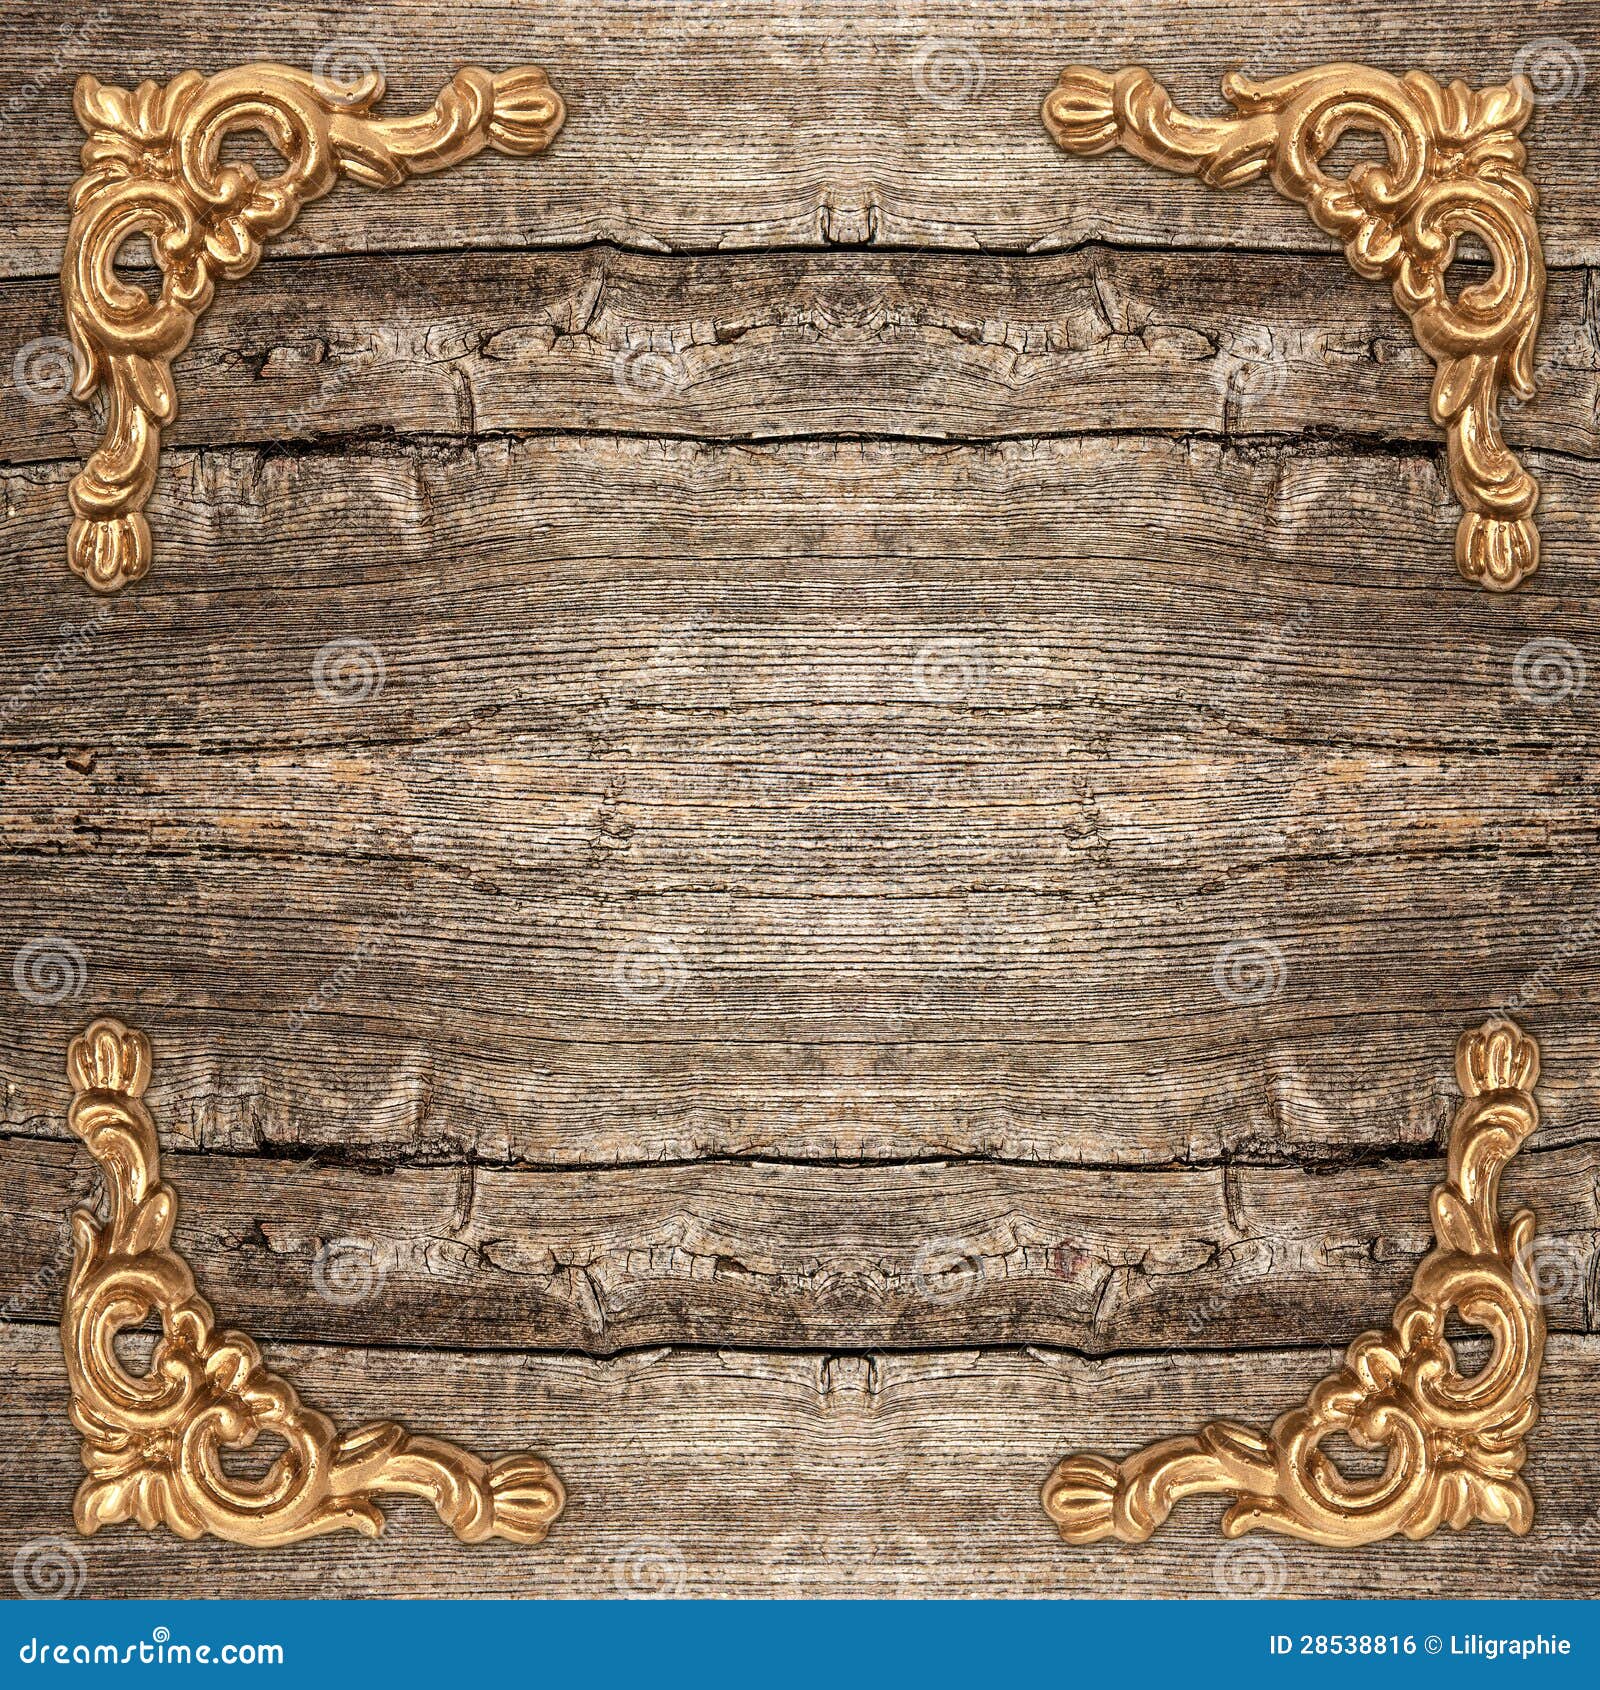 Rustic Wooden Background With Golden Corner Stock Photo ...